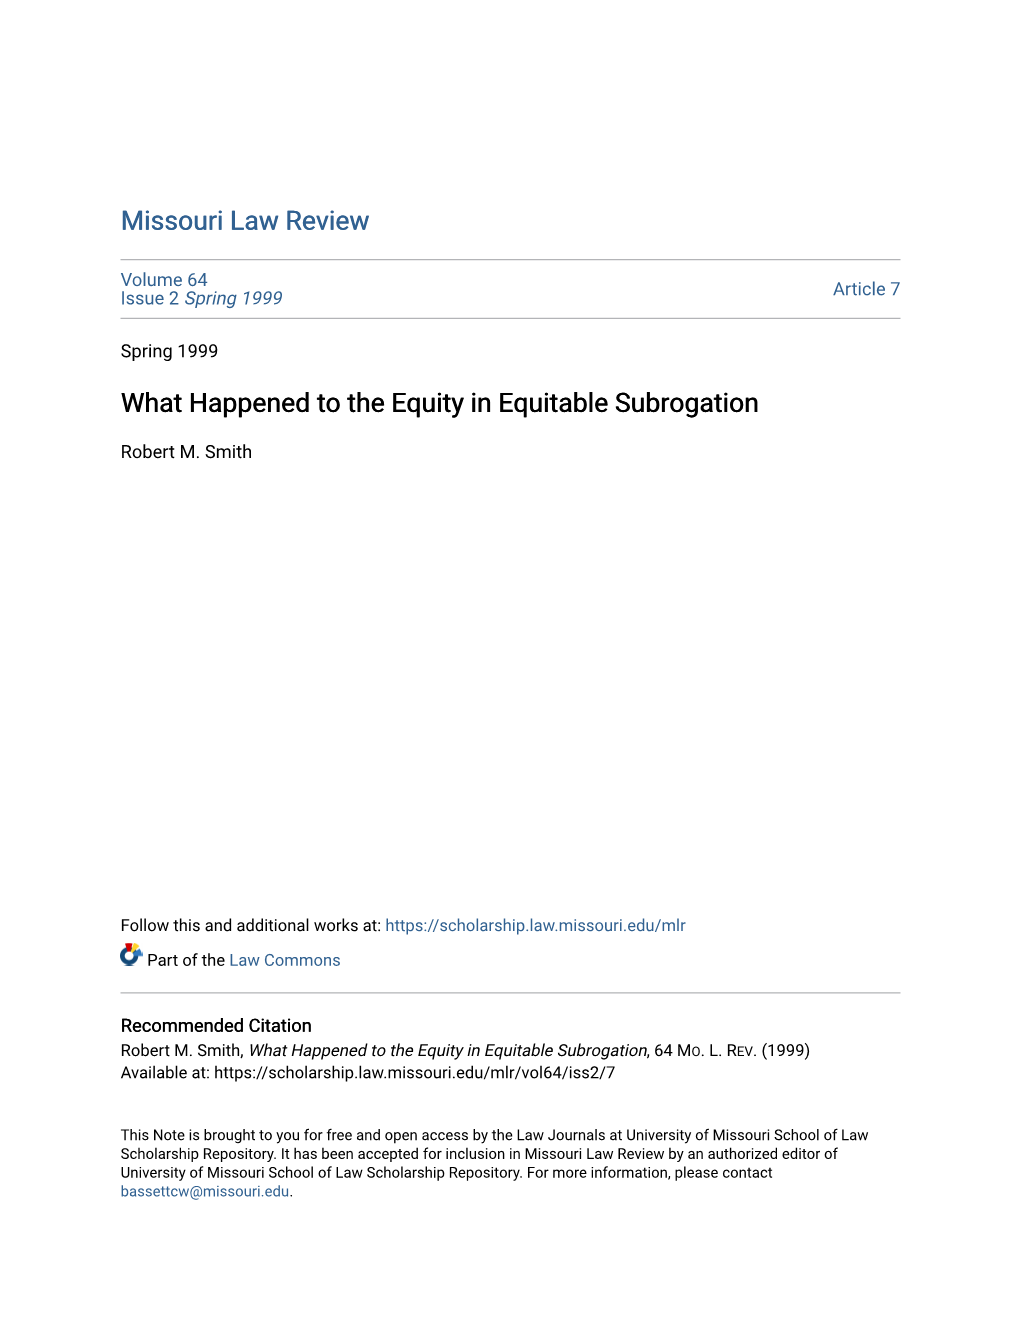 What Happened to the Equity in Equitable Subrogation